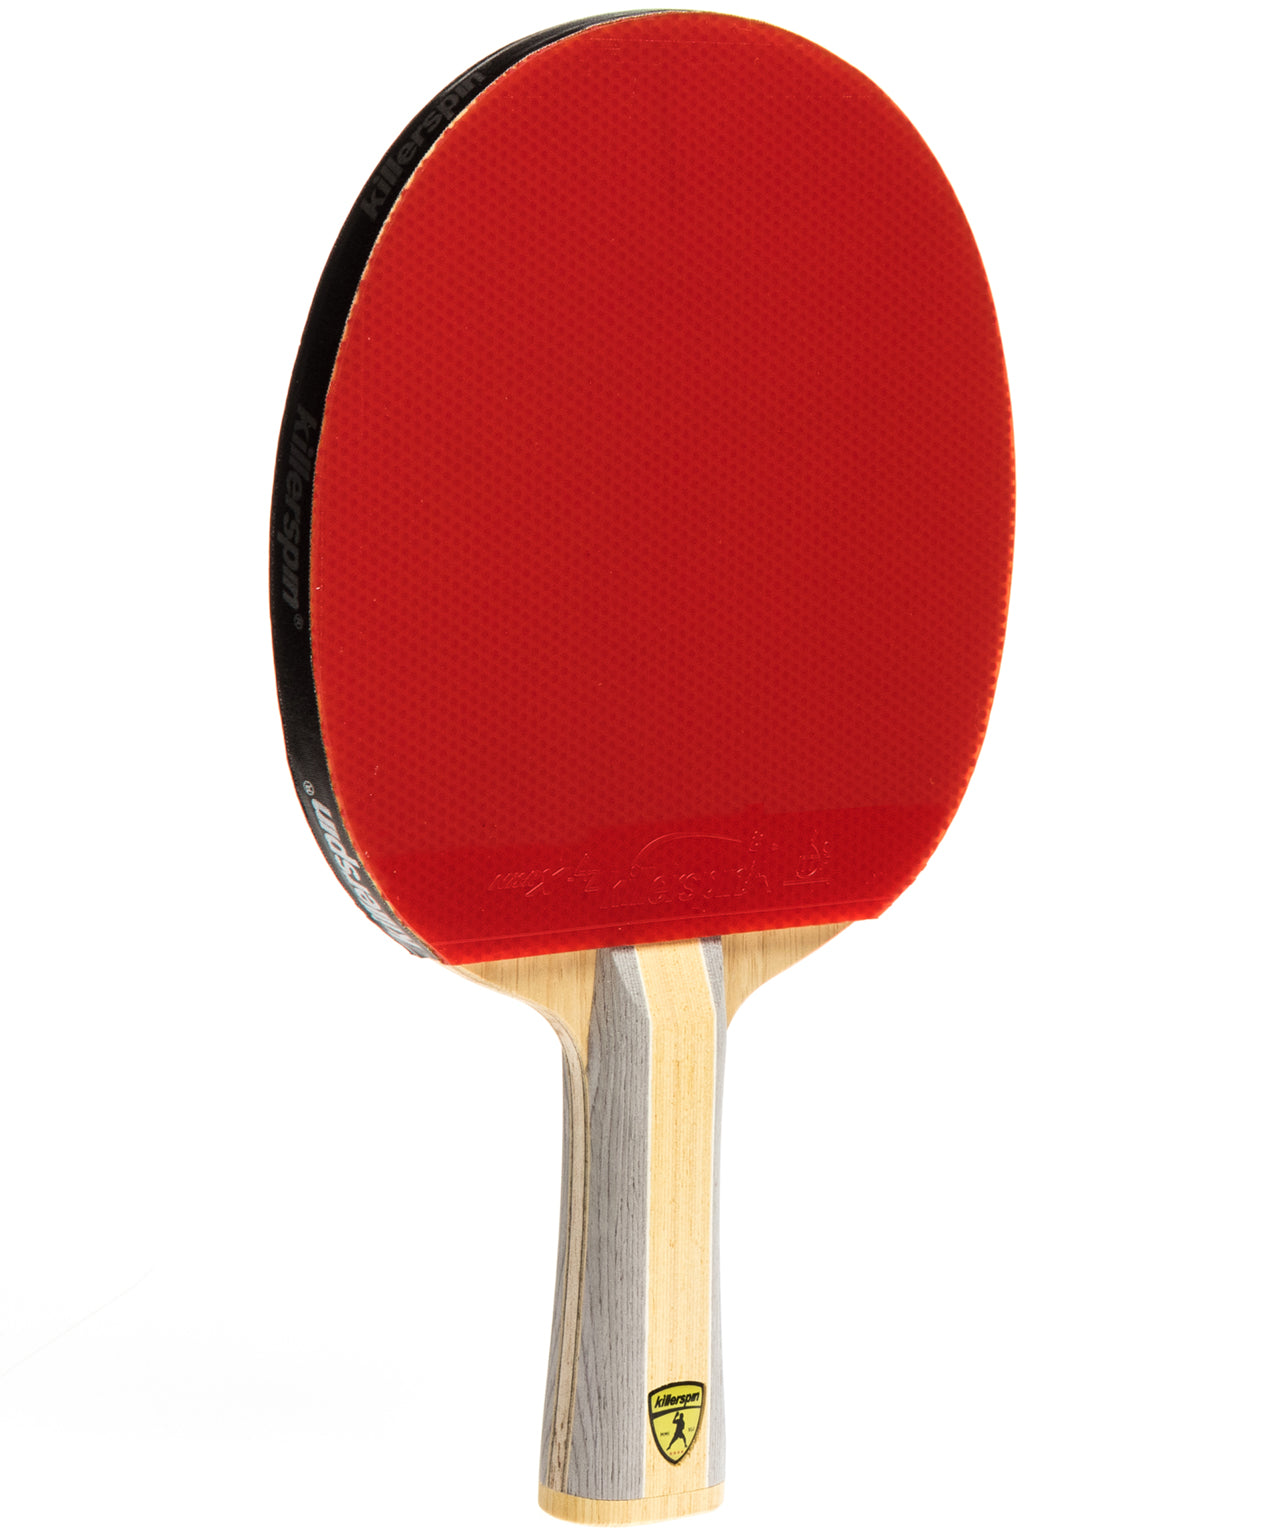 Killerspin Ping Pong Racket Diamond CQ - Flared Red Rubber